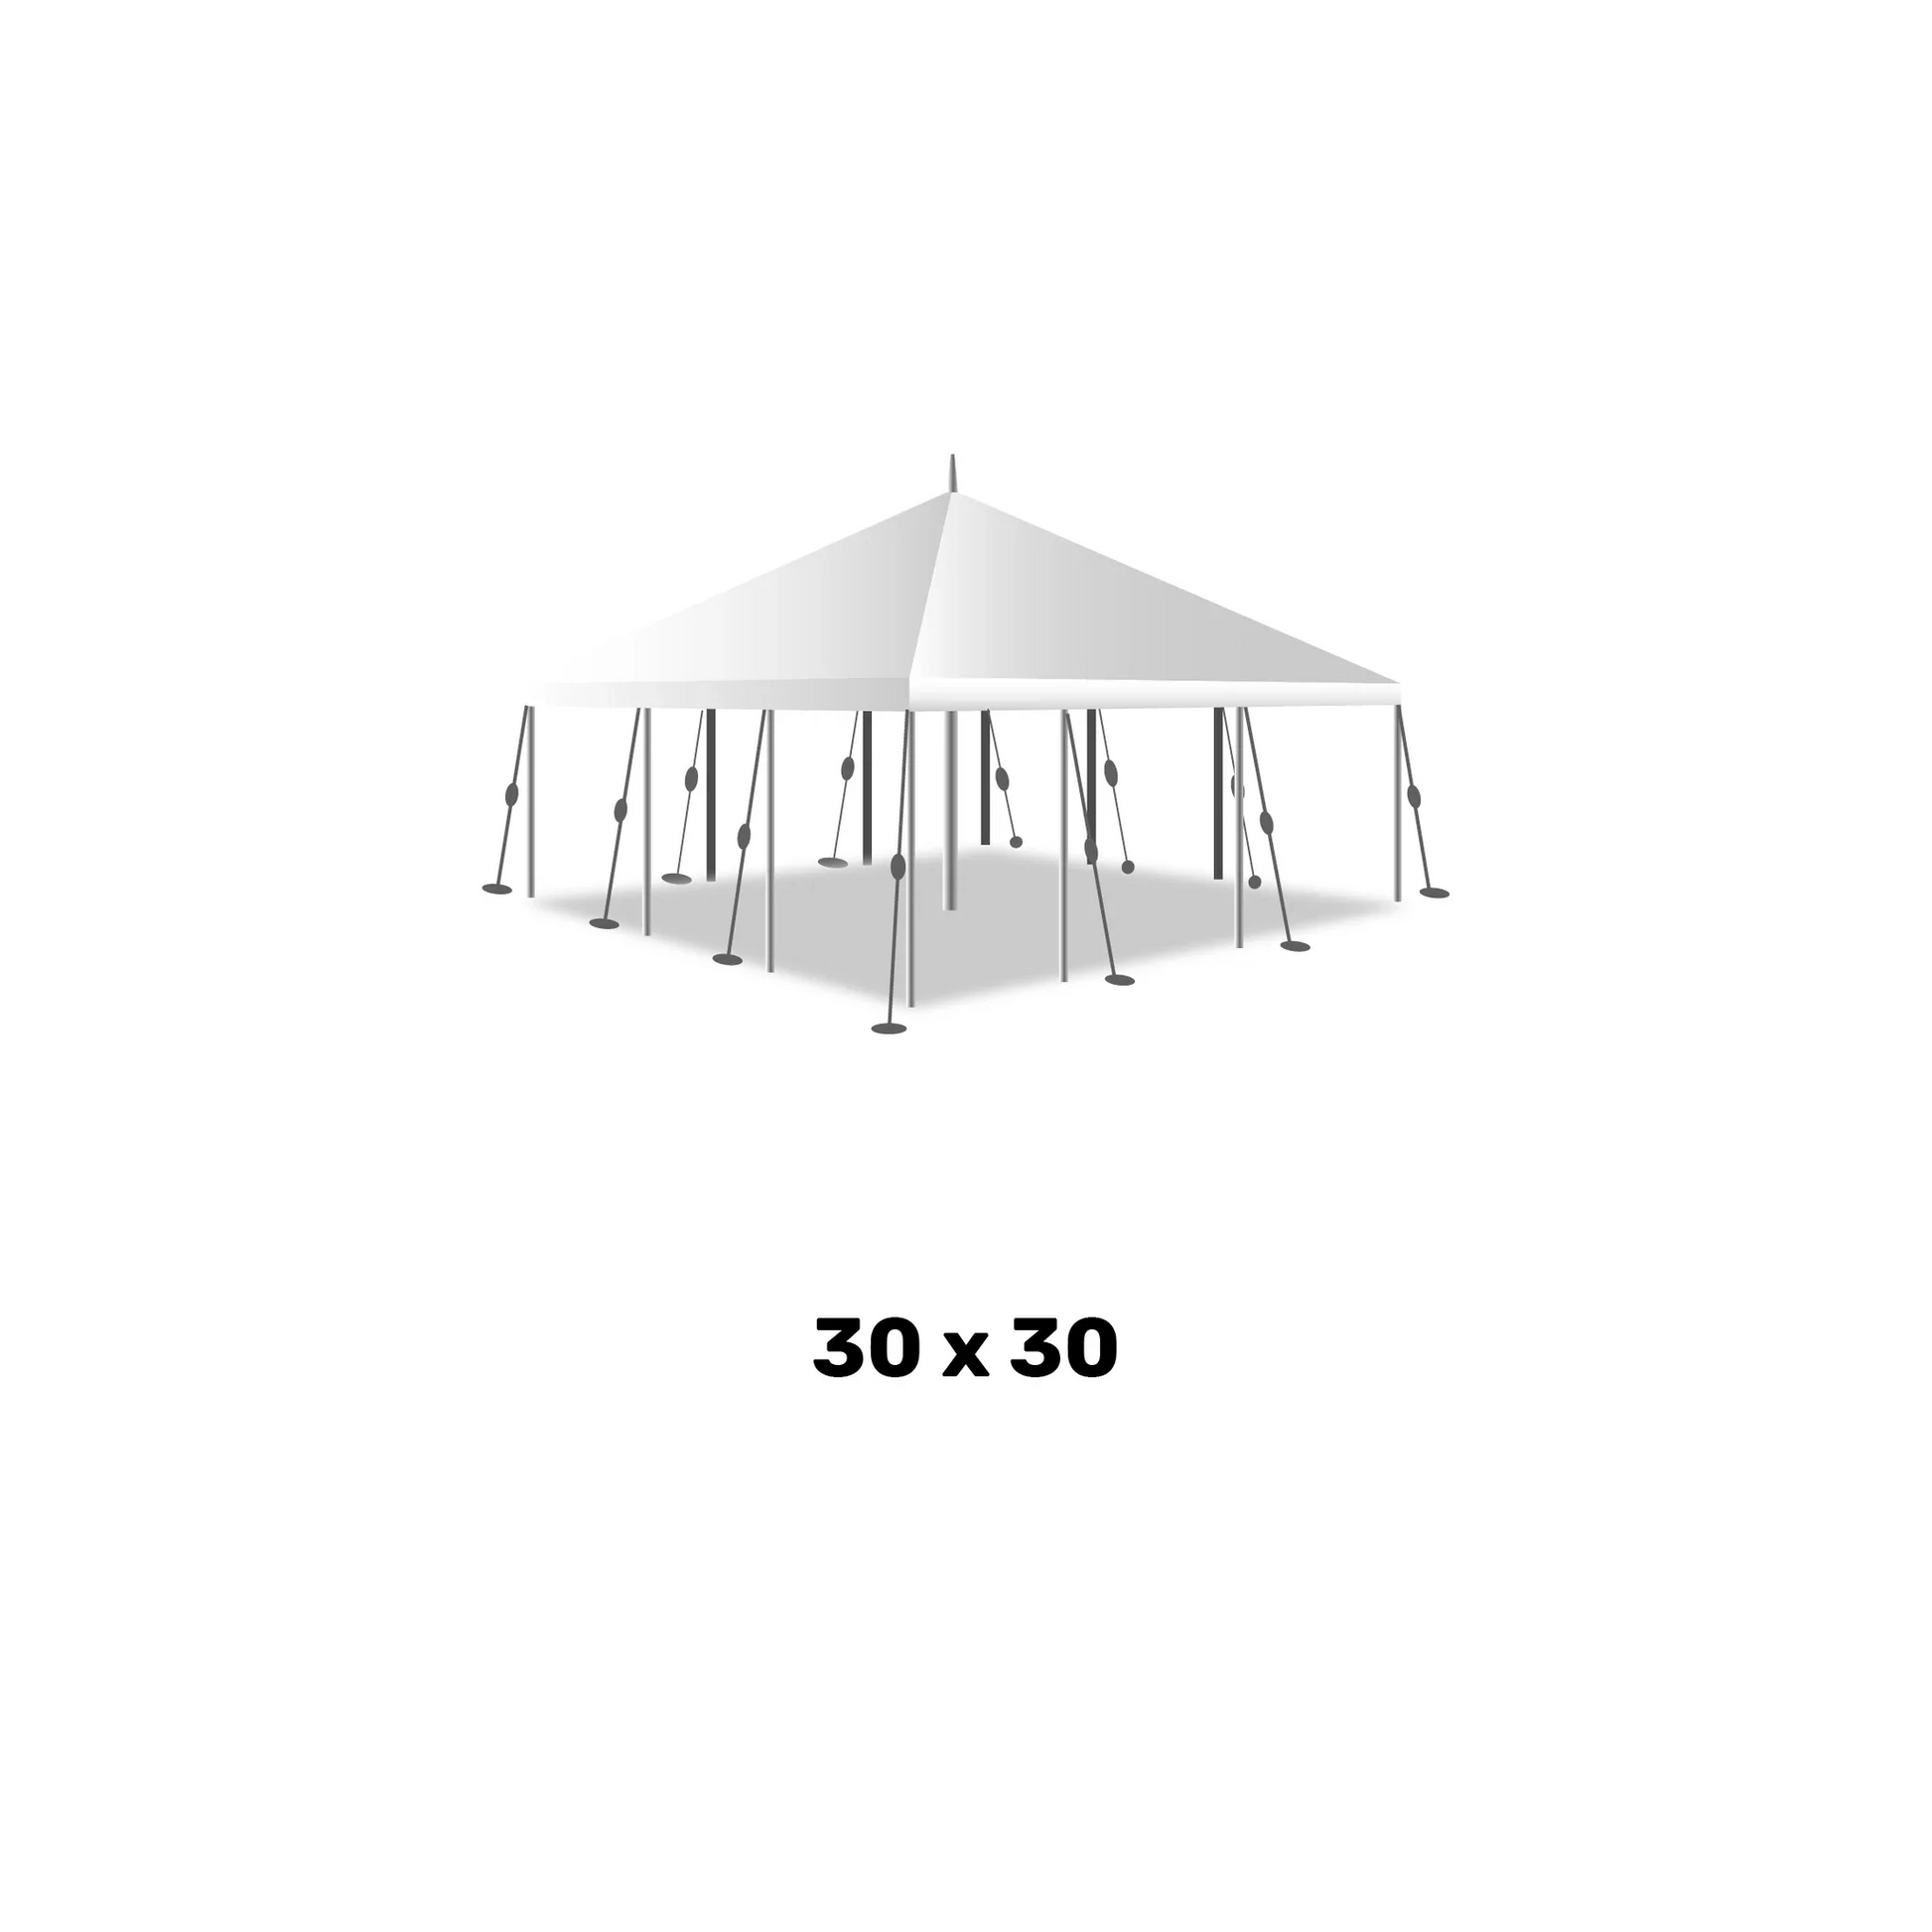 a 30 foot by 30 foot white marquee high peak pole tent